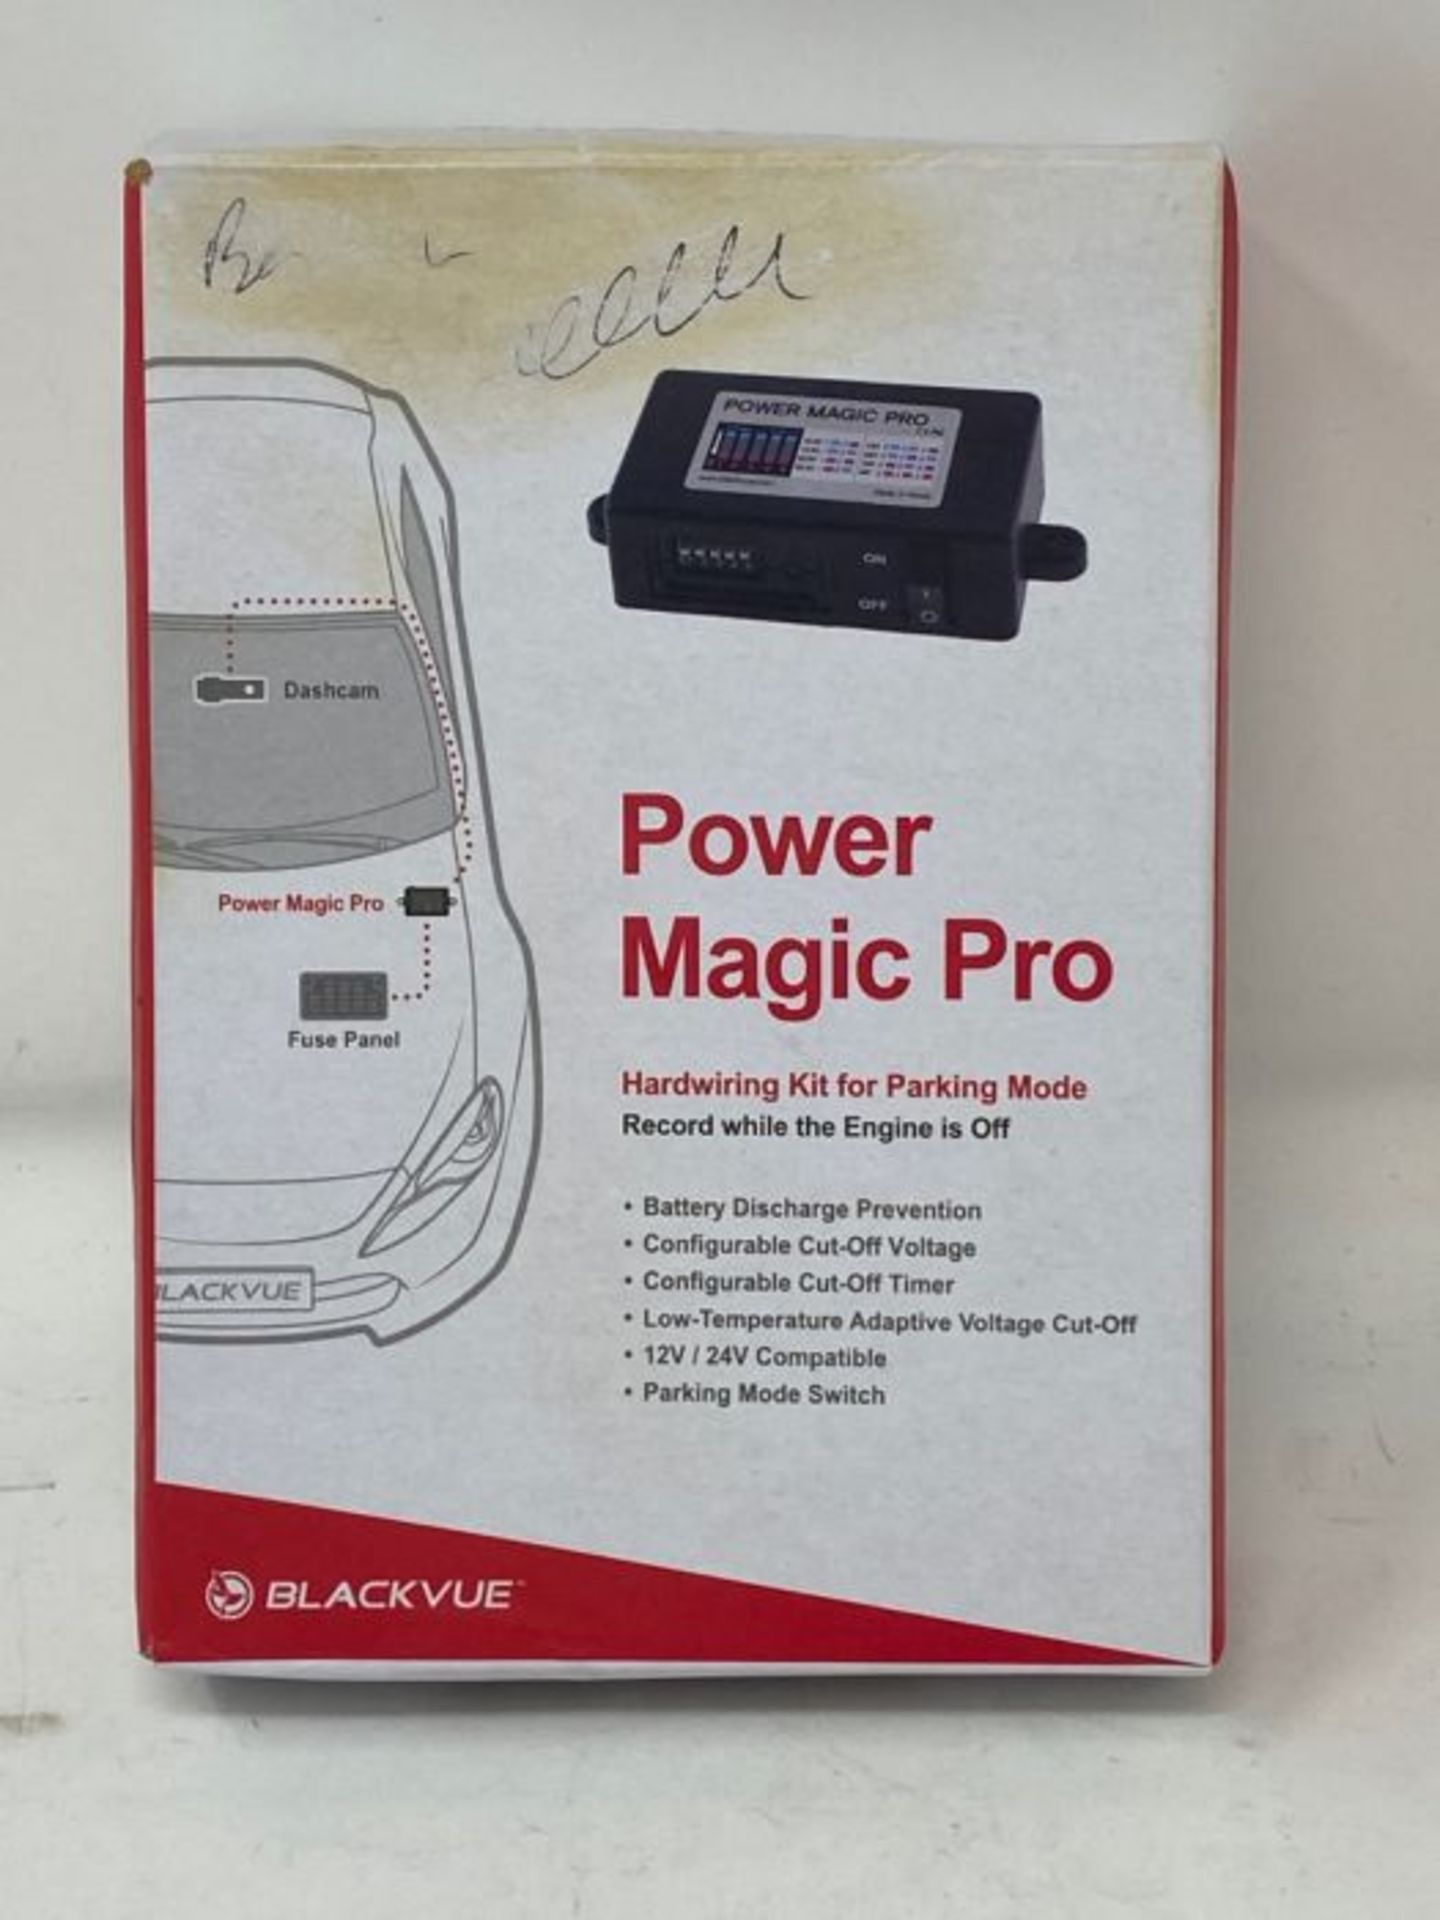 BlackVue Power Magic Pro Hardwire Kit with Parking Mode Switch and Car Battery Protect - Image 2 of 3